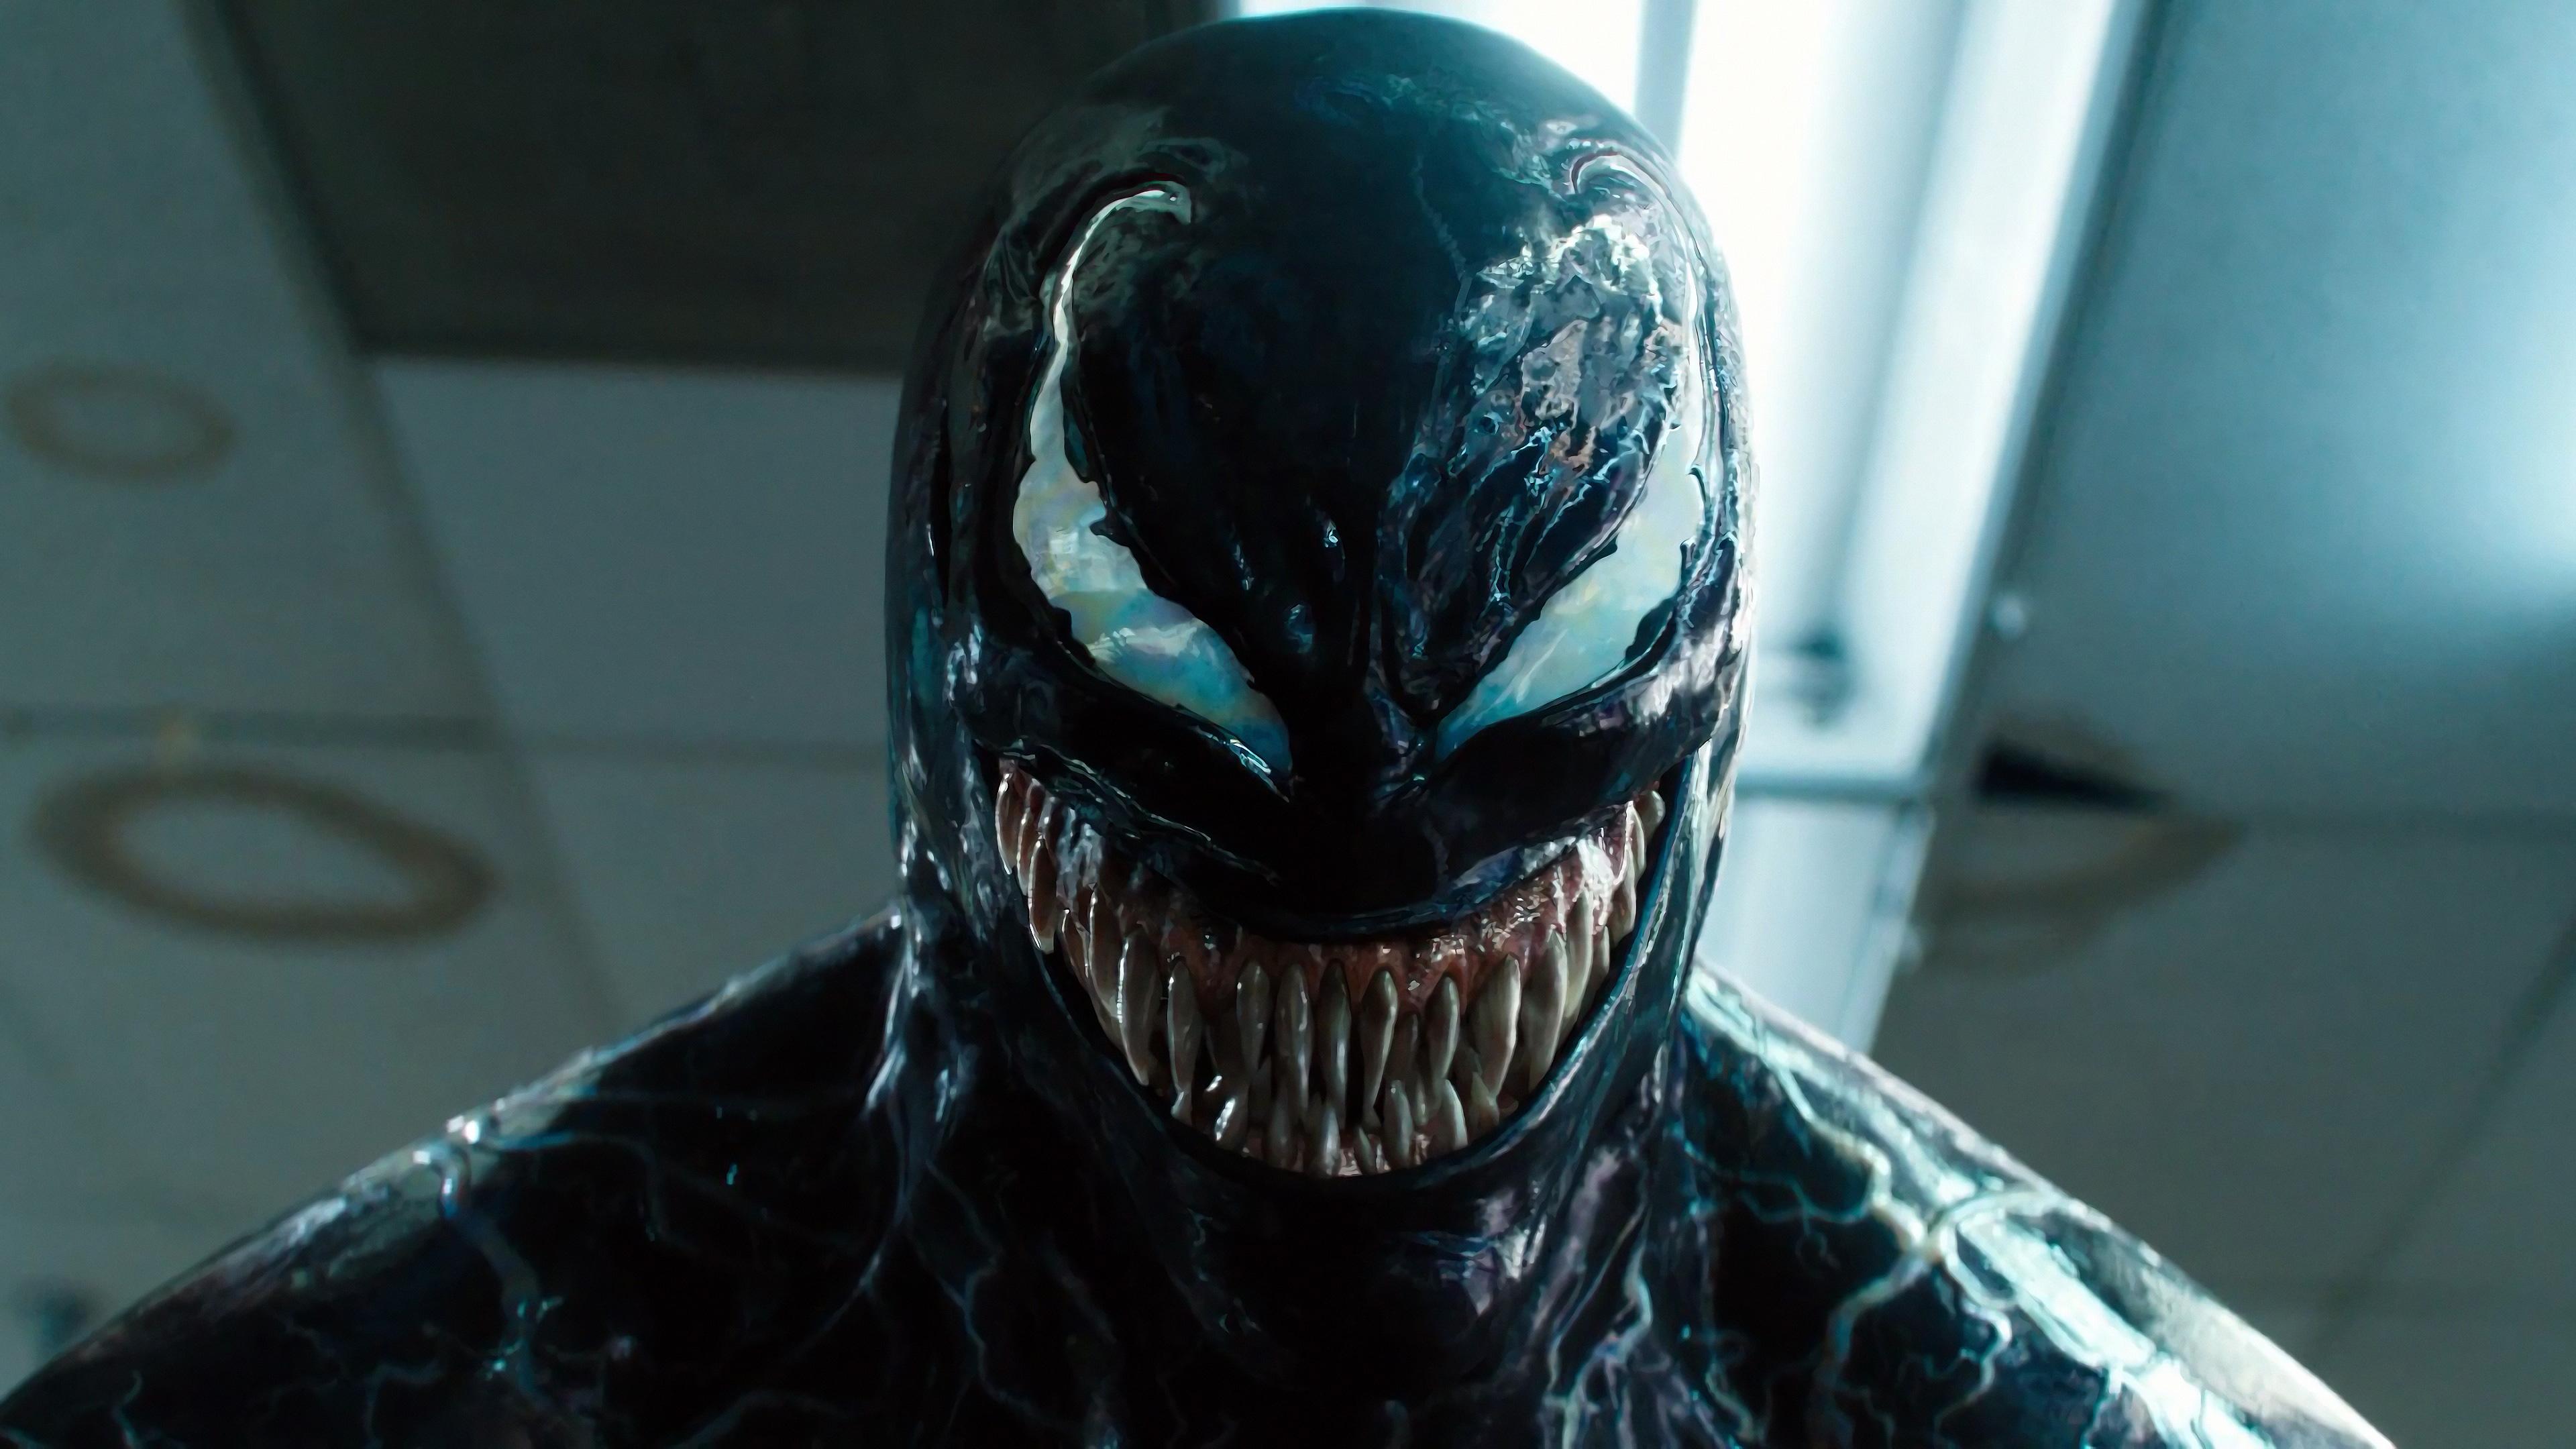 3840 x 2160 · jpeg - Venom 2018 Movie 4k, HD Movies, 4k Wallpapers, Images, Backgrounds ...